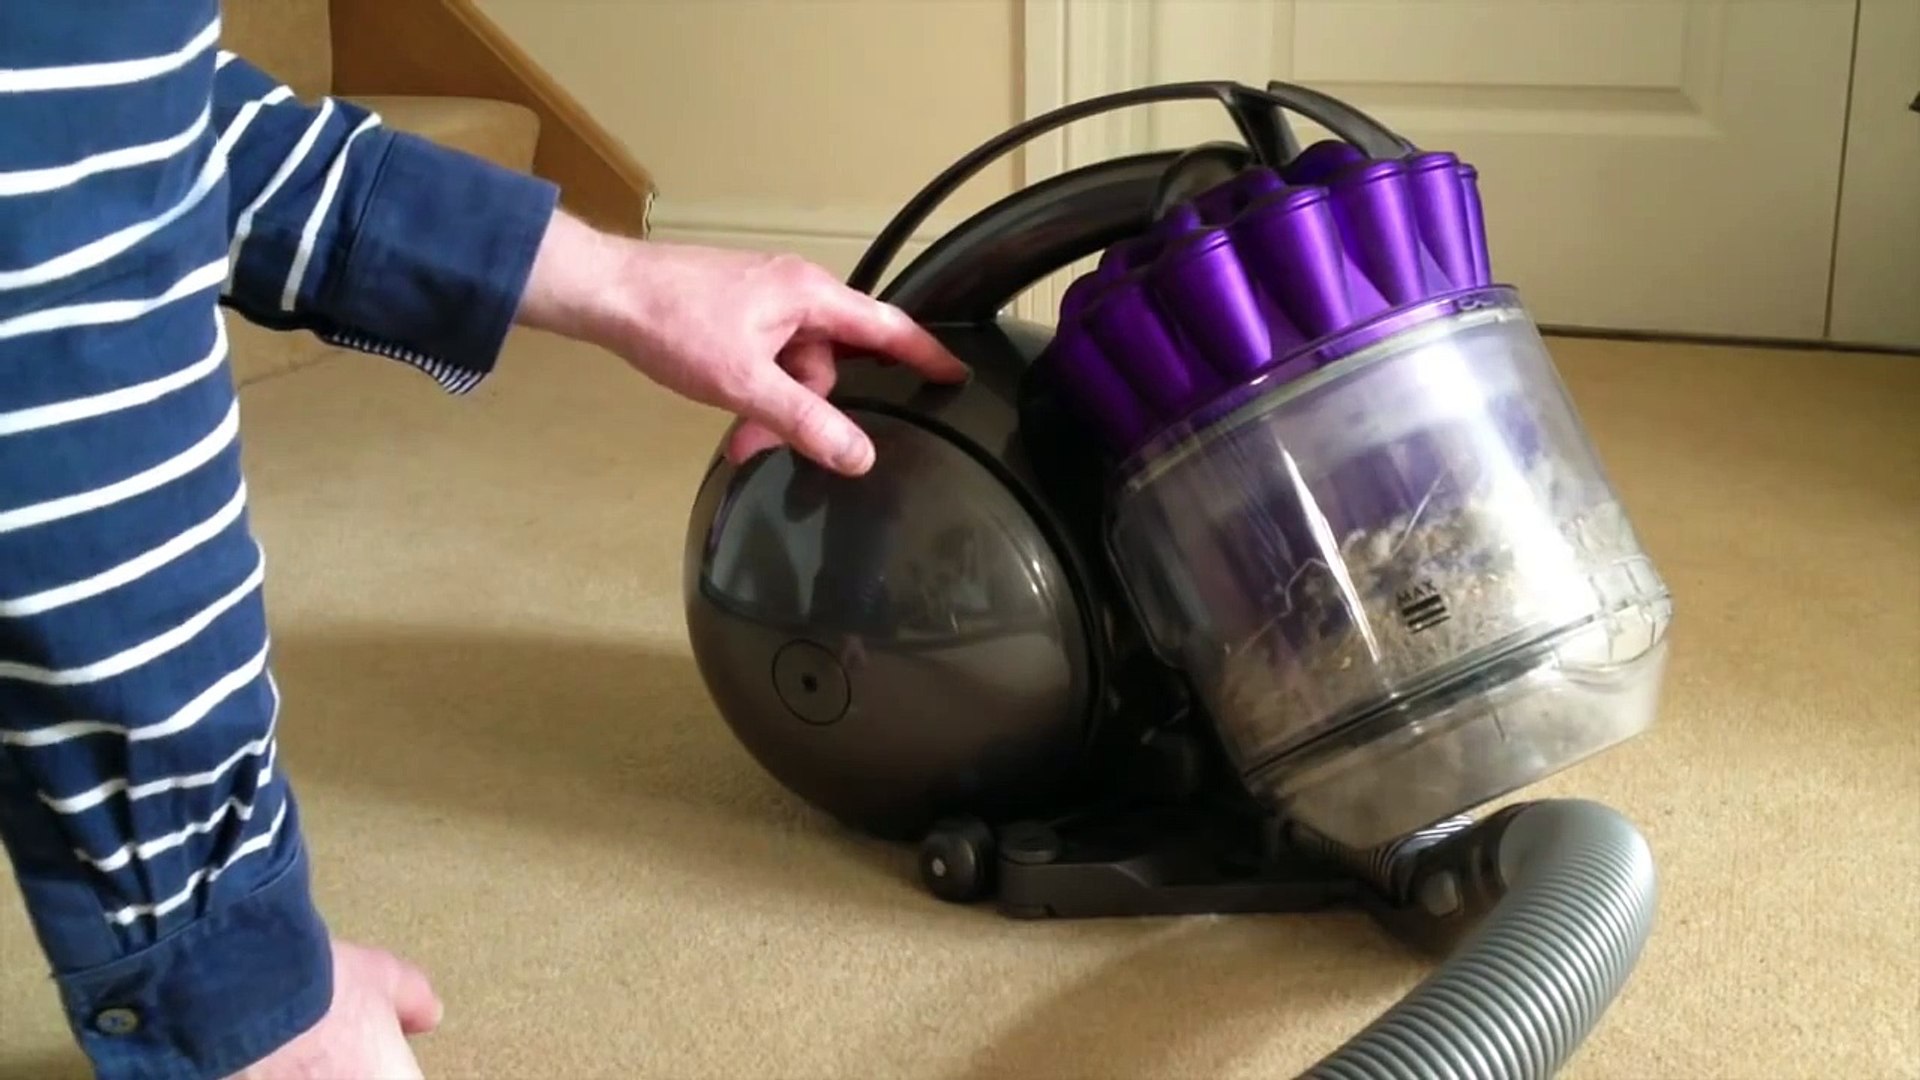 How To Empty A Clogging Dyson Bag less DC39 Animal Vacuum Cleaner - video  Dailymotion